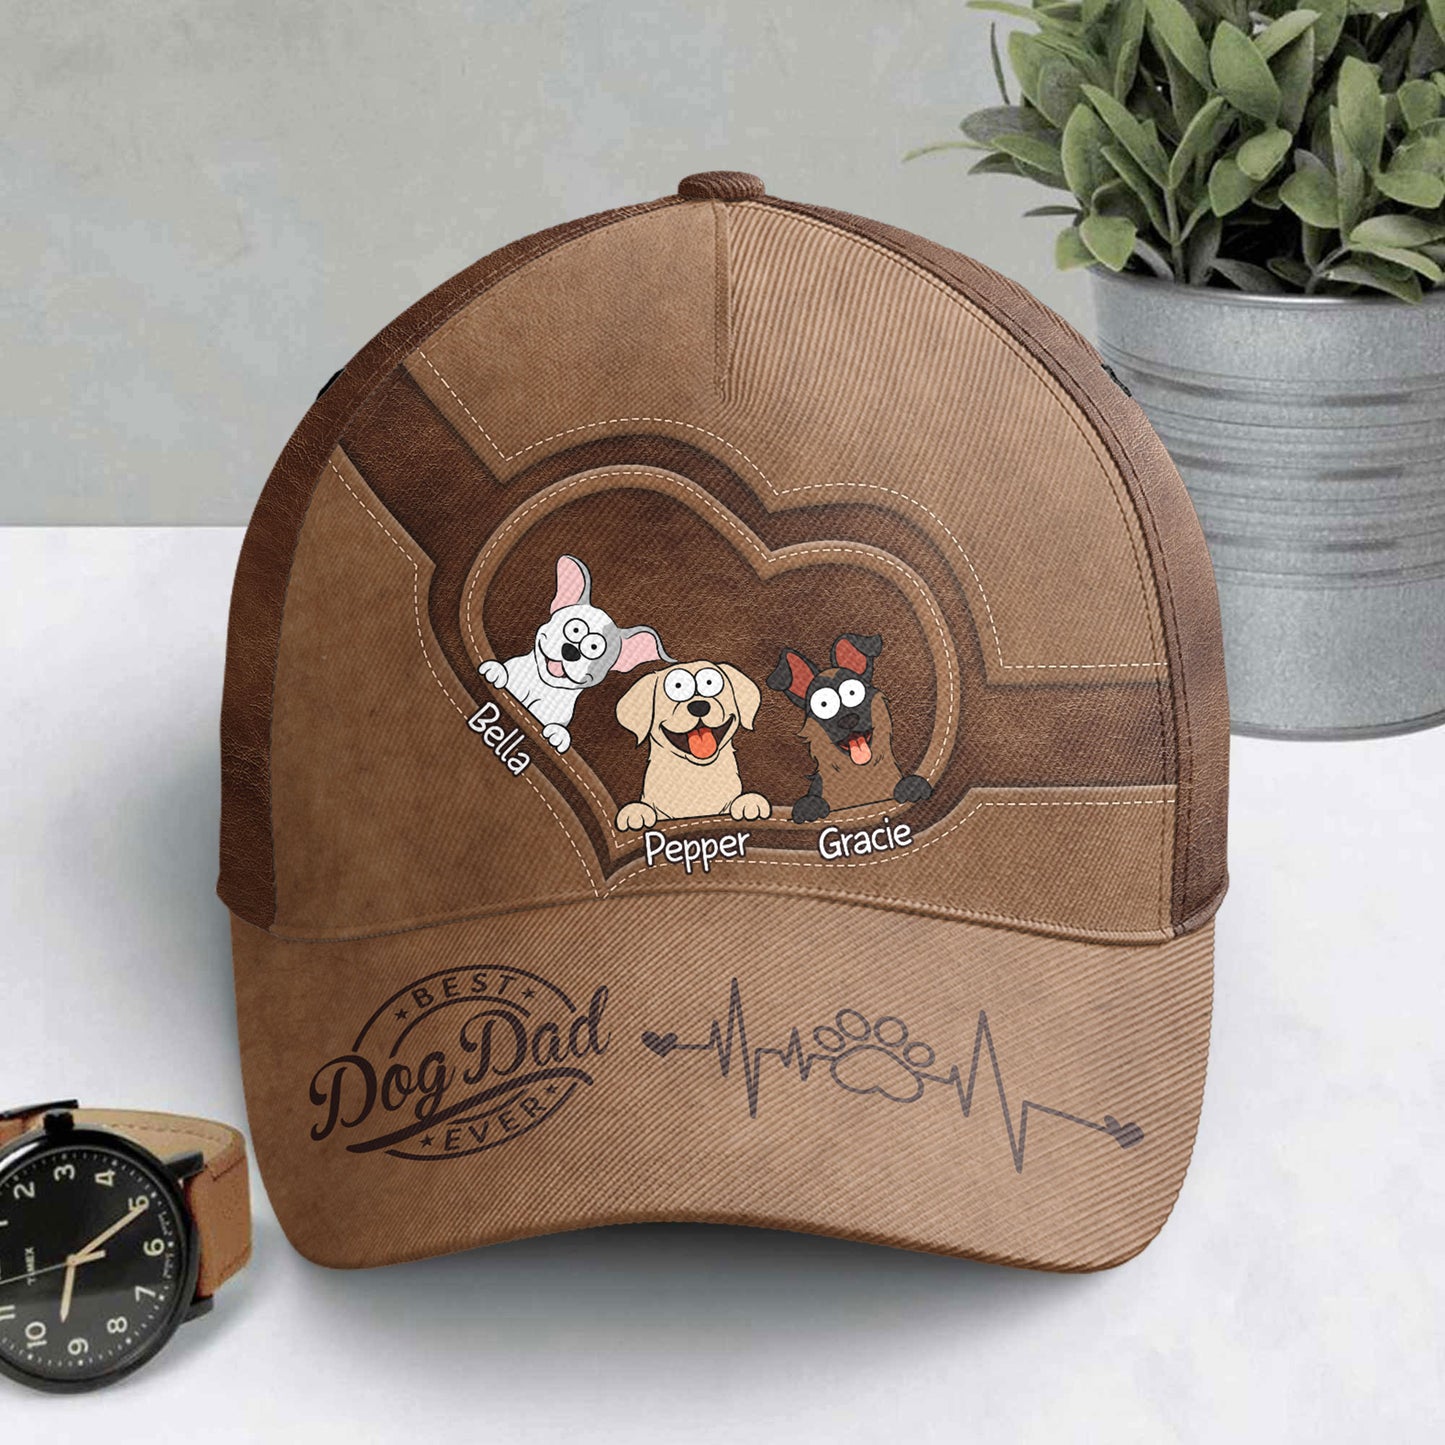 Best Dog Dad Ever - Personalized Classic Cap